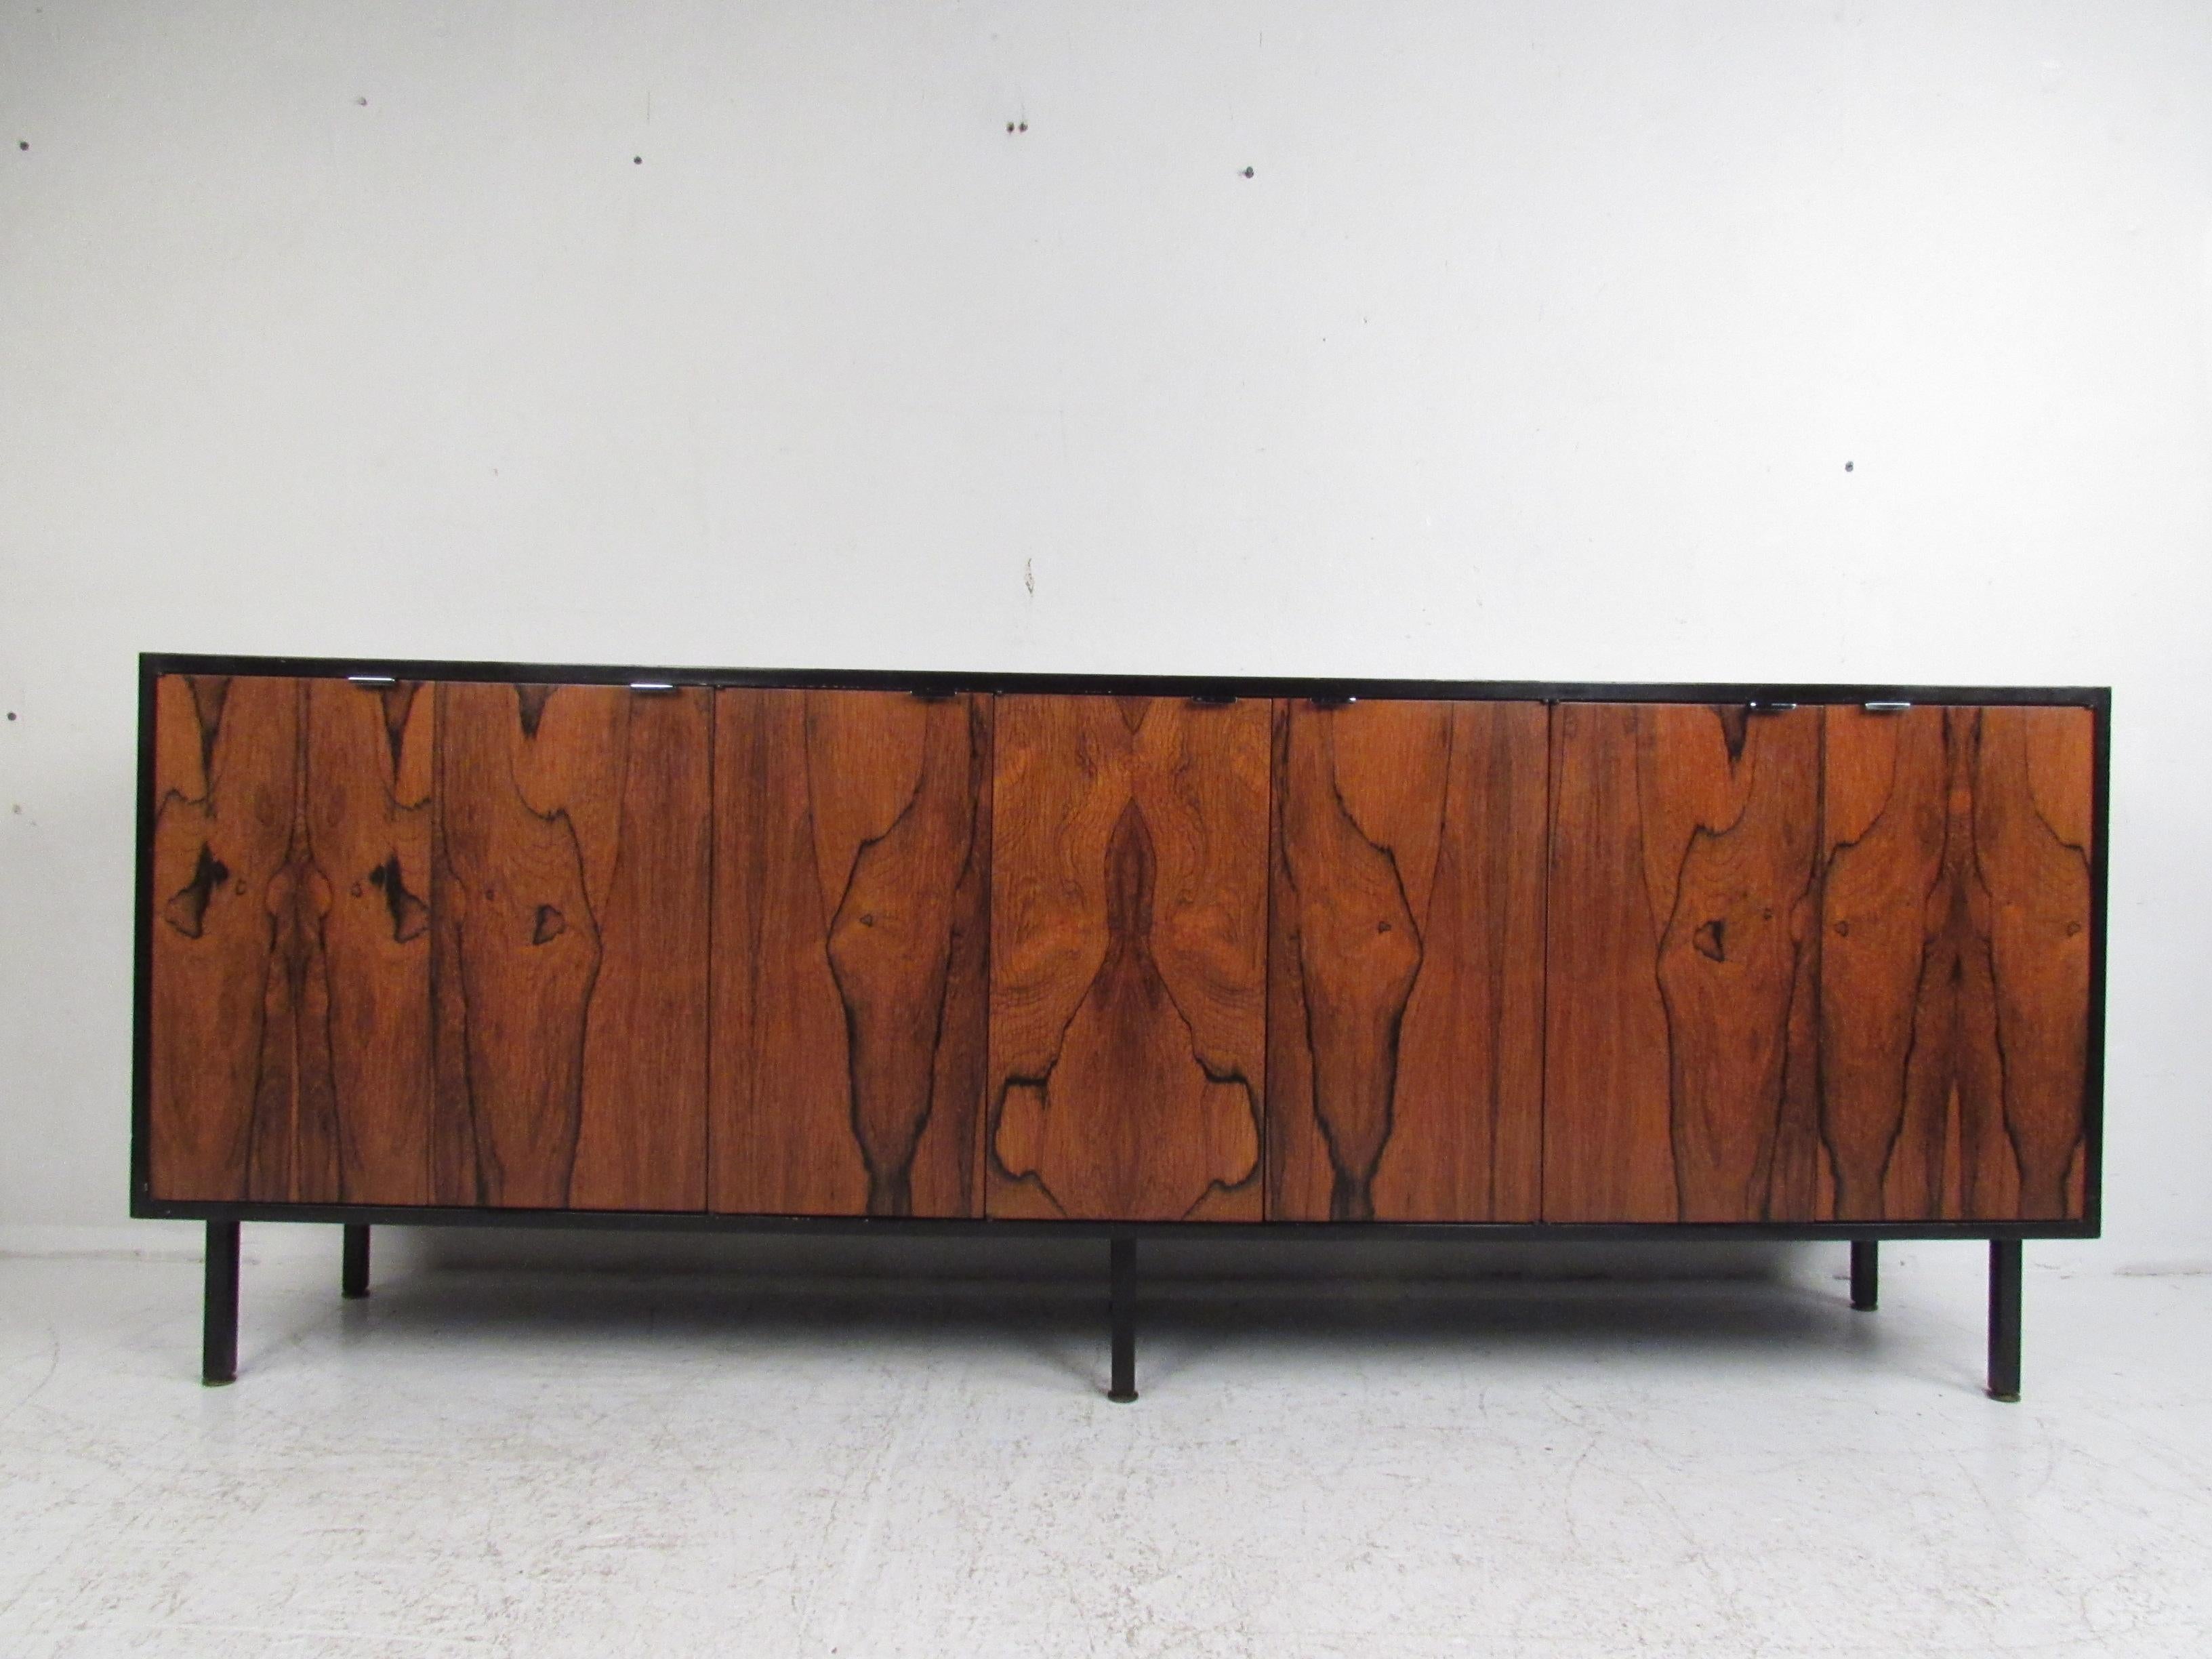 This stunning vintage modern sideboard features a two-tone design with a rosewood front and a black casing. A stylish case piece that provides plenty of room for storage within its hefty drawers and large compartments with shelves. The unique metal